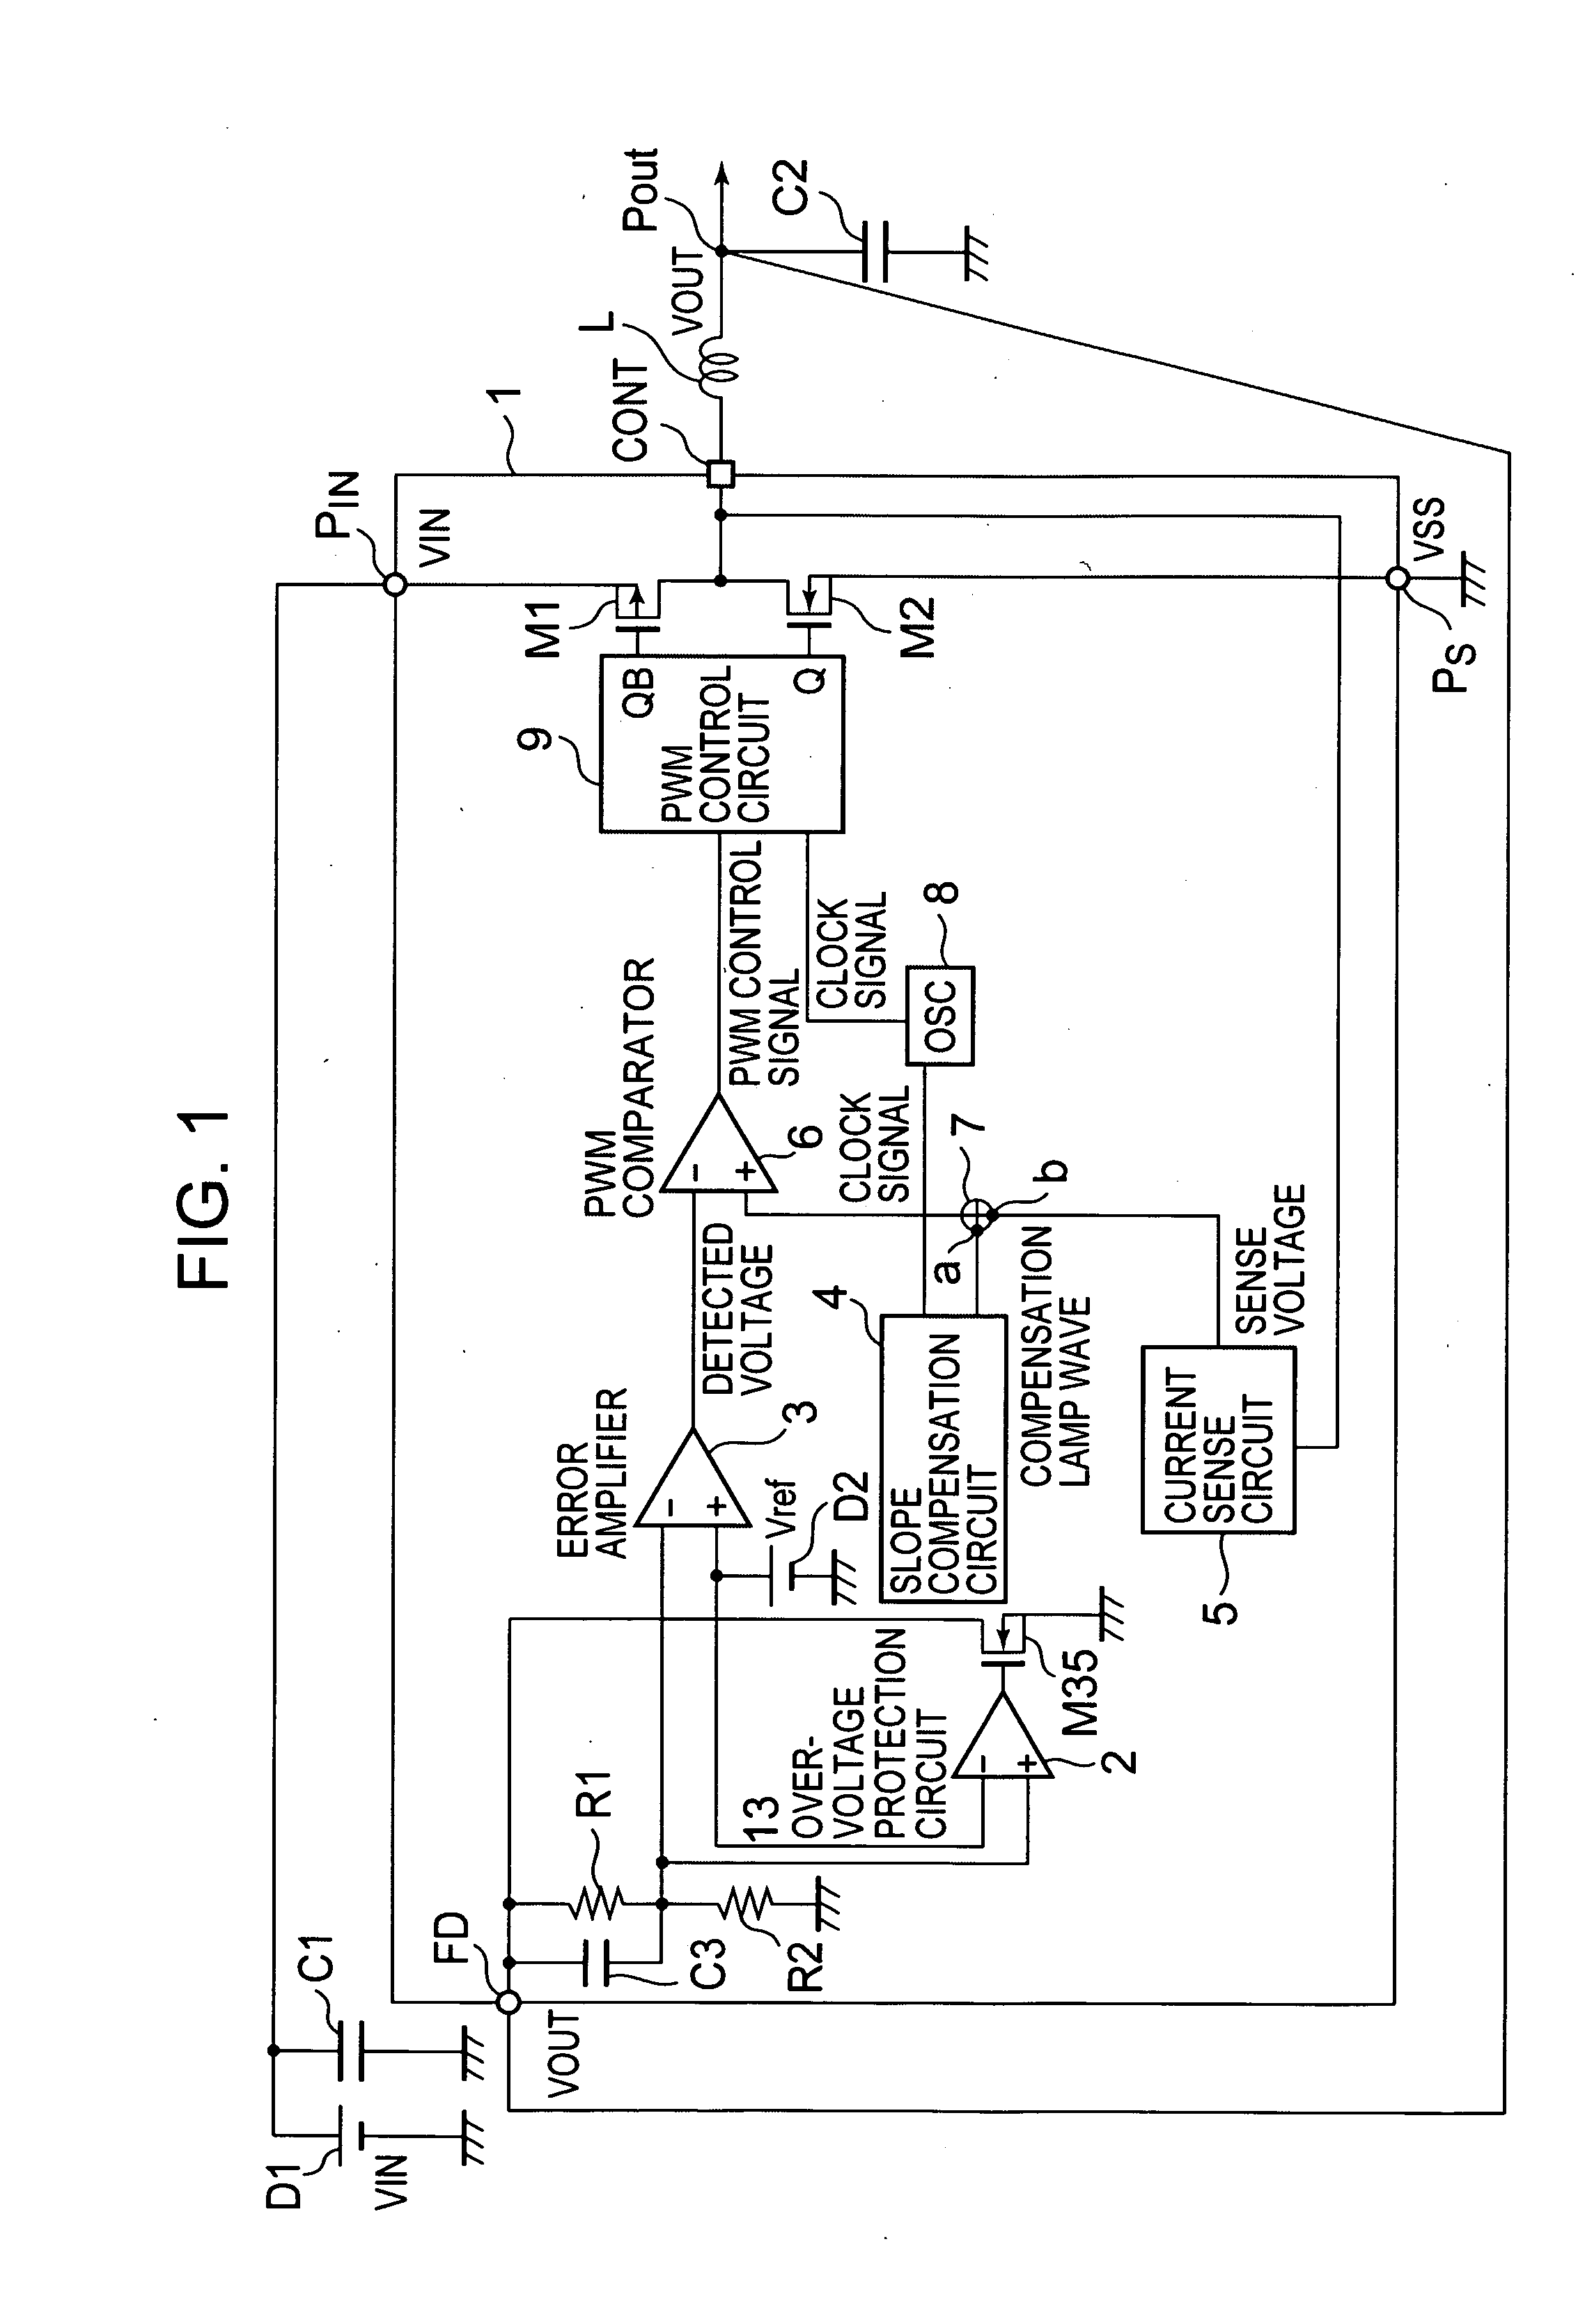 Current detector circuit and current mode switching regulator